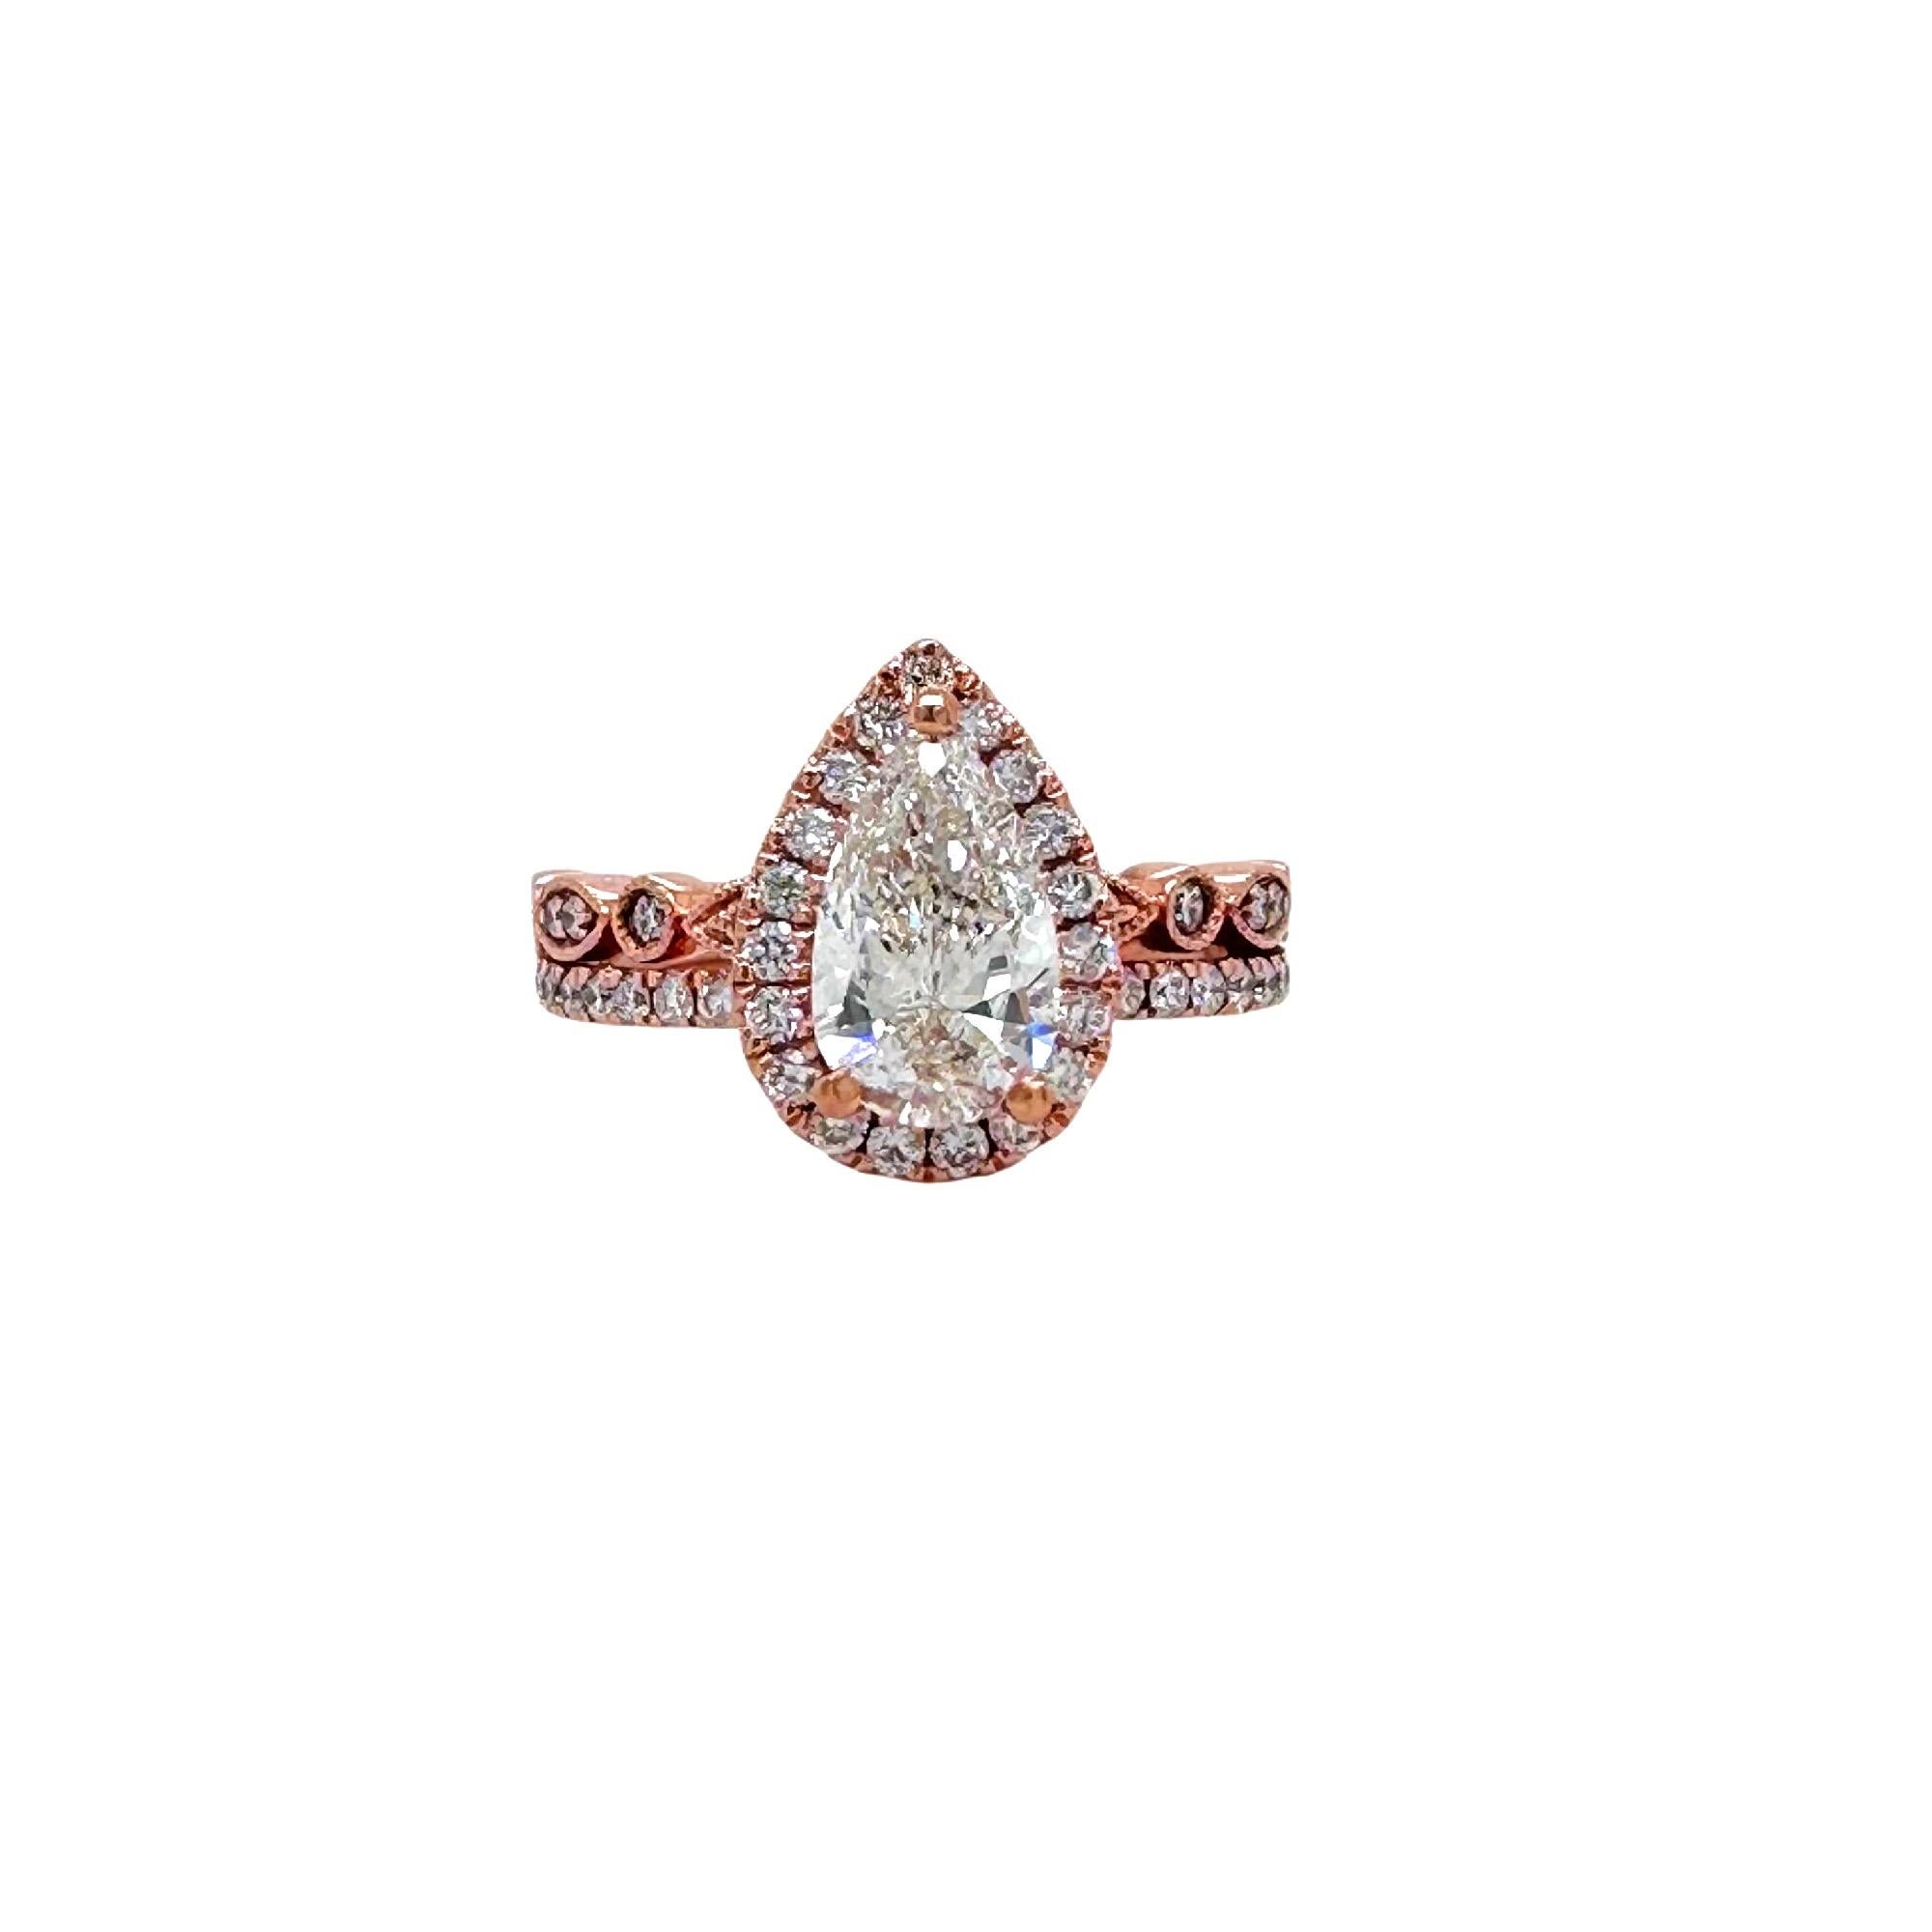 Robins Brothers Signature Pear Diamond 1.375tcw 14k Rose Gold Engagement Ring For Sale 5